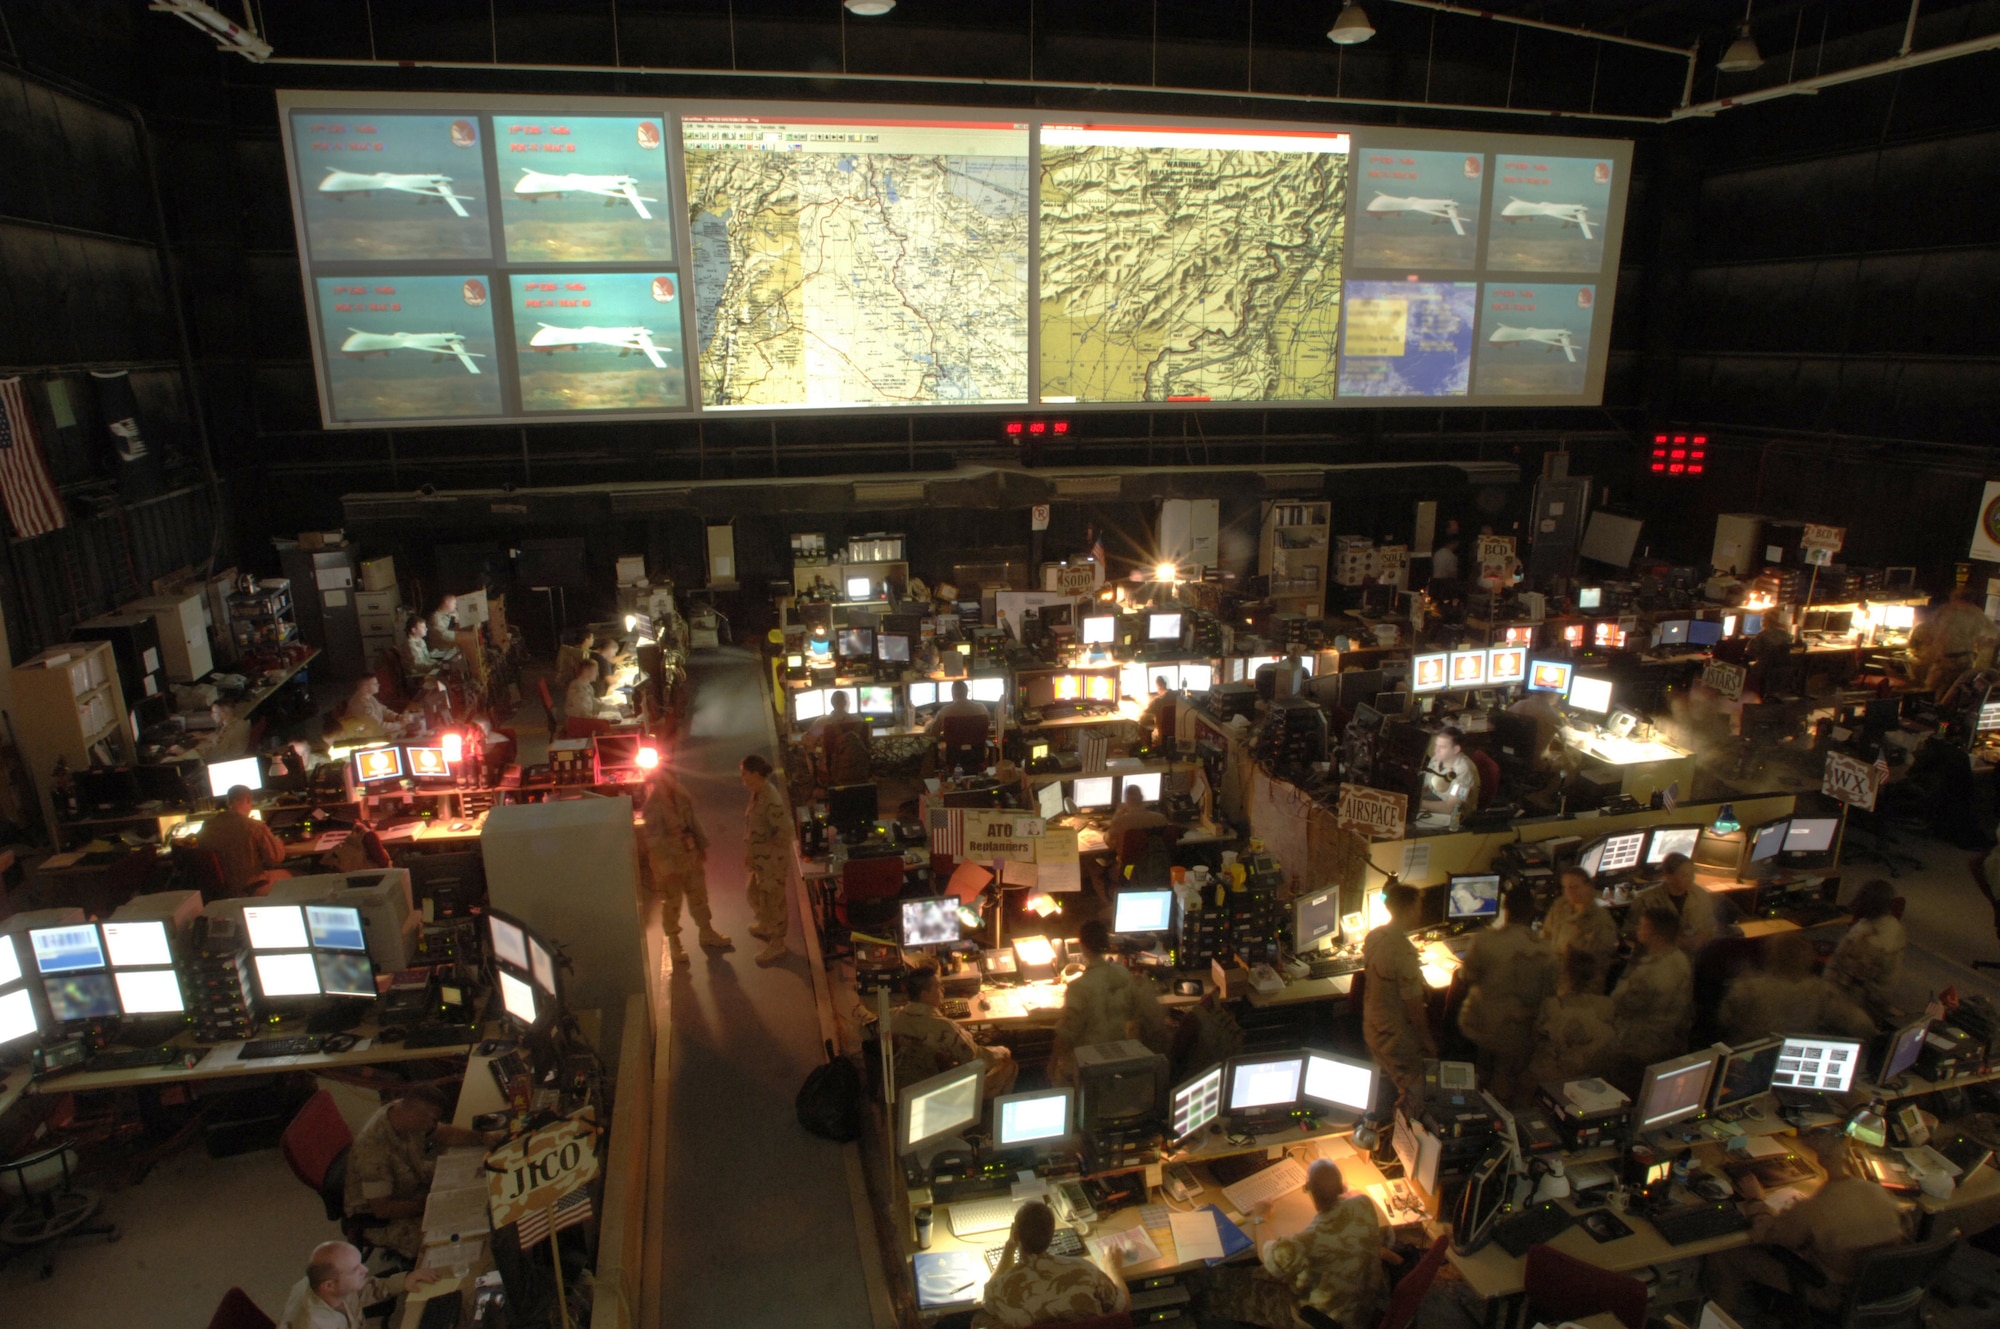 The Combined Air & Space Operations Center (CAOC) Al Udeid Air Base, Qatar, built in 2002 and declared operational in March 2003.